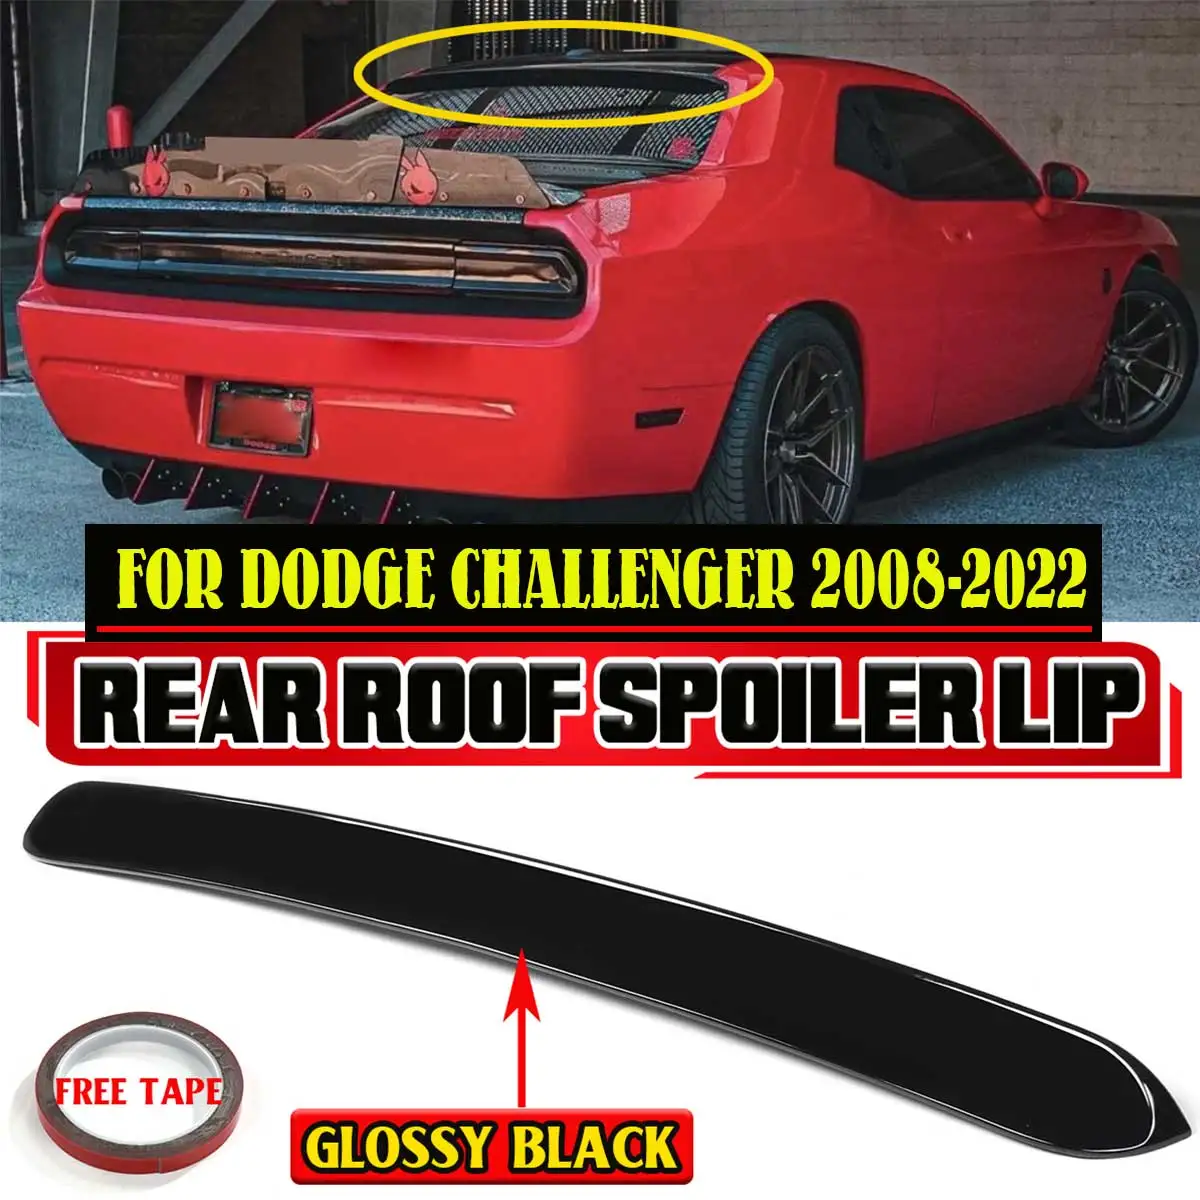 Glossy Black/Carbon Fiber Look Car Rear Roof Spoiler Wing Lip ABS For DODGE For Challenger 2008-2022 Rear Tail Wing Spoiler Lip